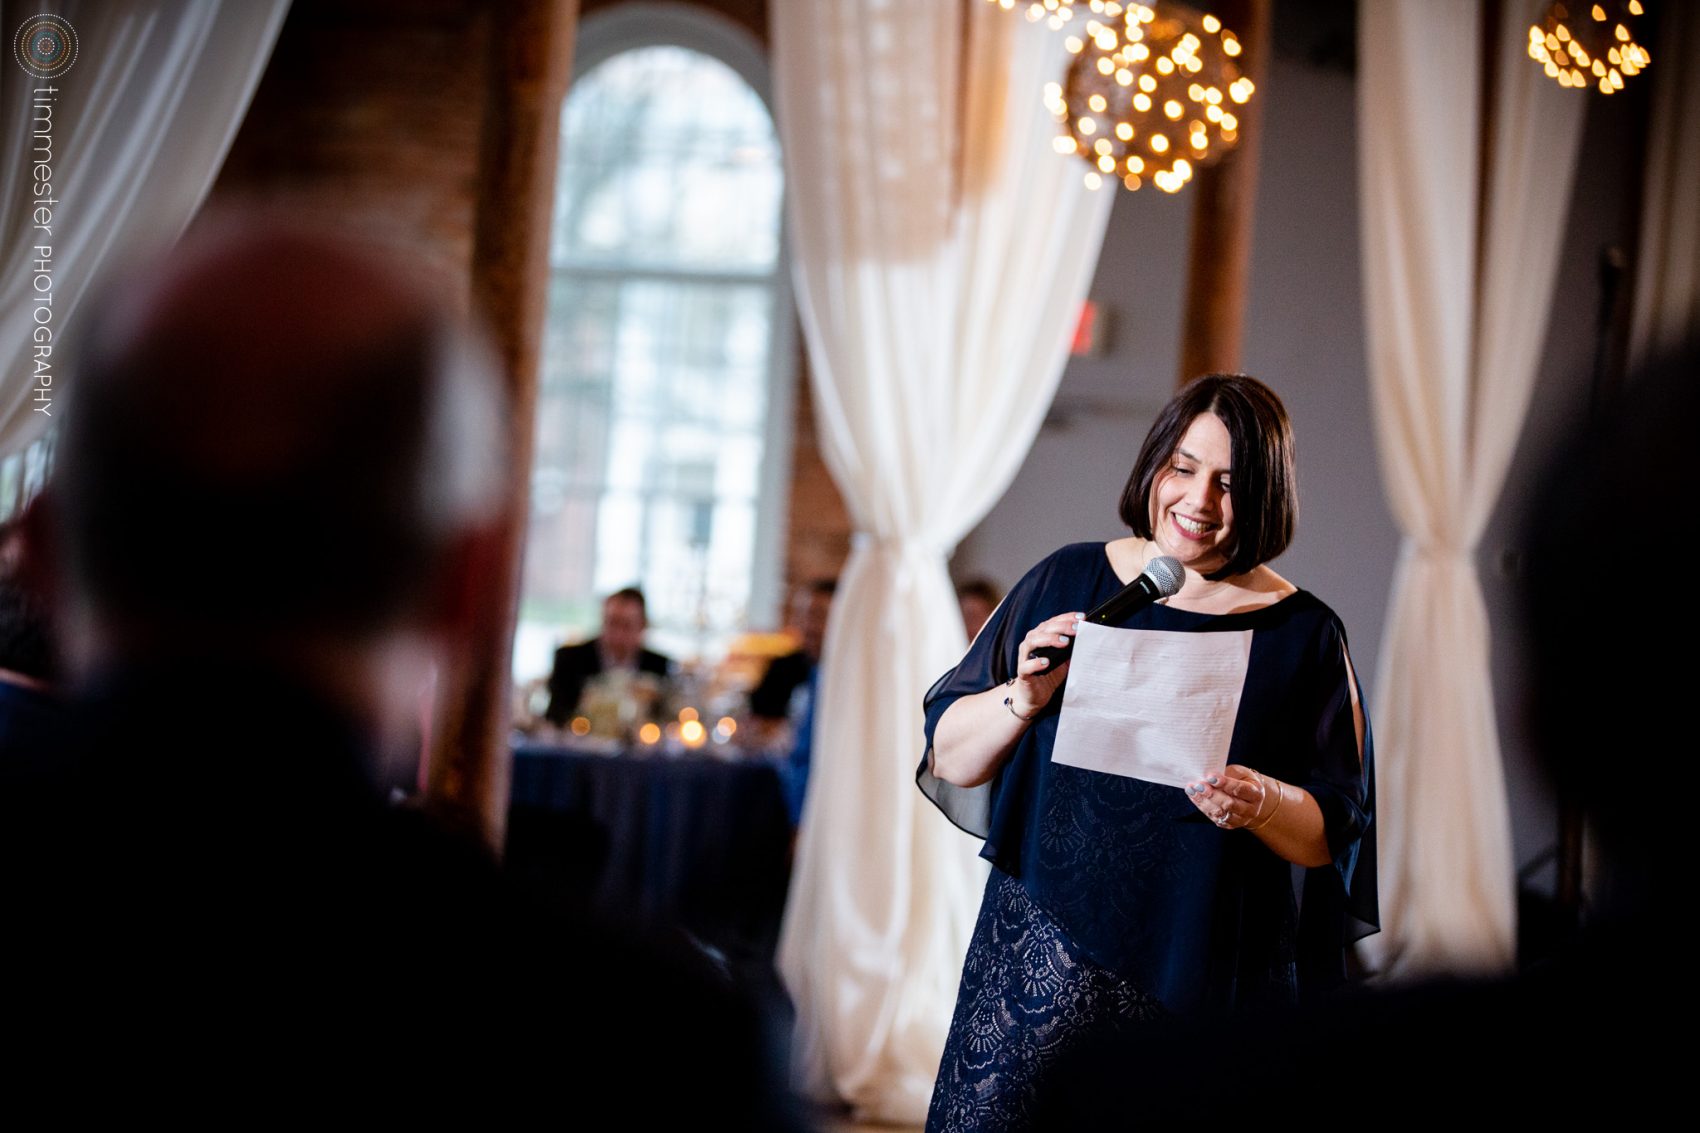 The maid of honor toast at Jessica + David's wedding at The Cotton Room in North Carolina.